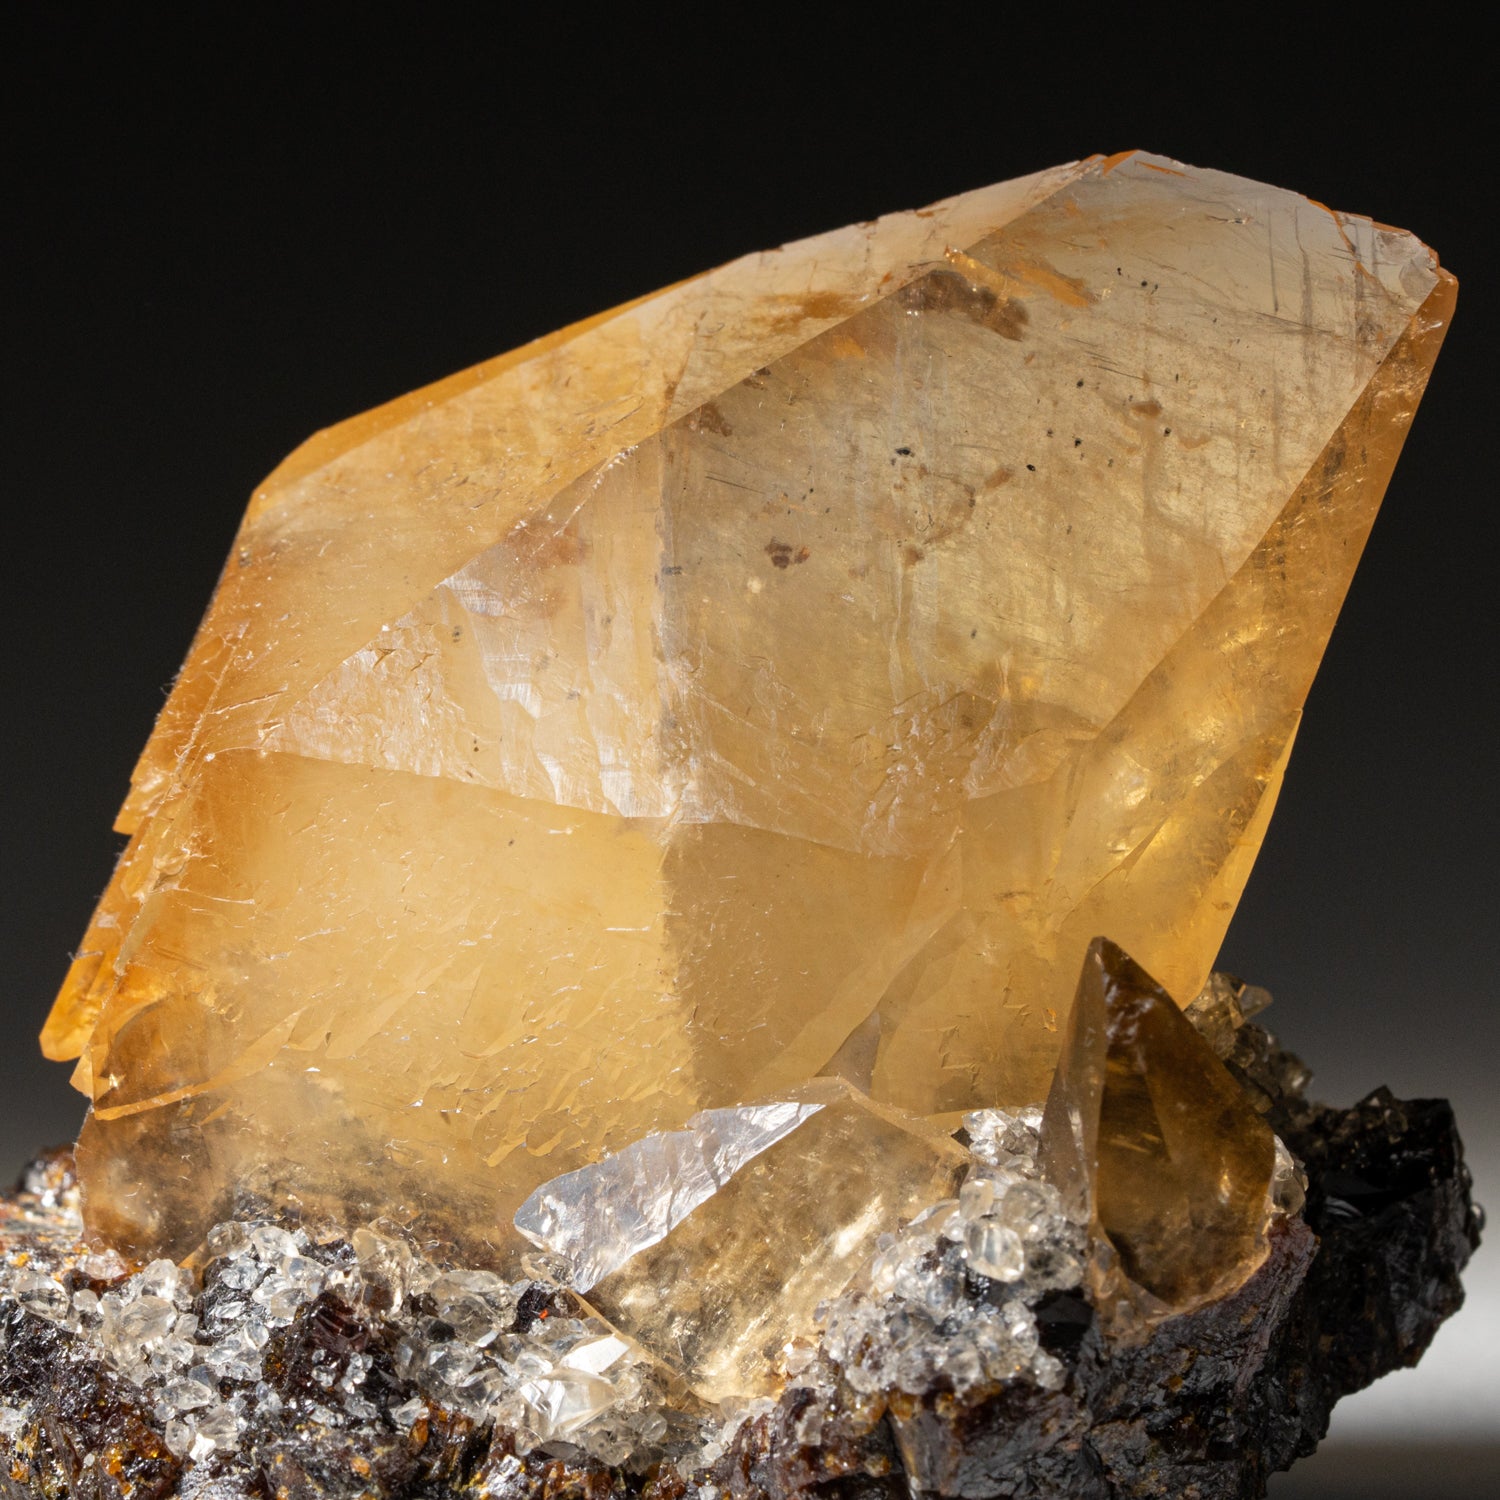 Twinned Golden Calcite Crystal from Elmwood Mine, Tennessee (153.1 grams)